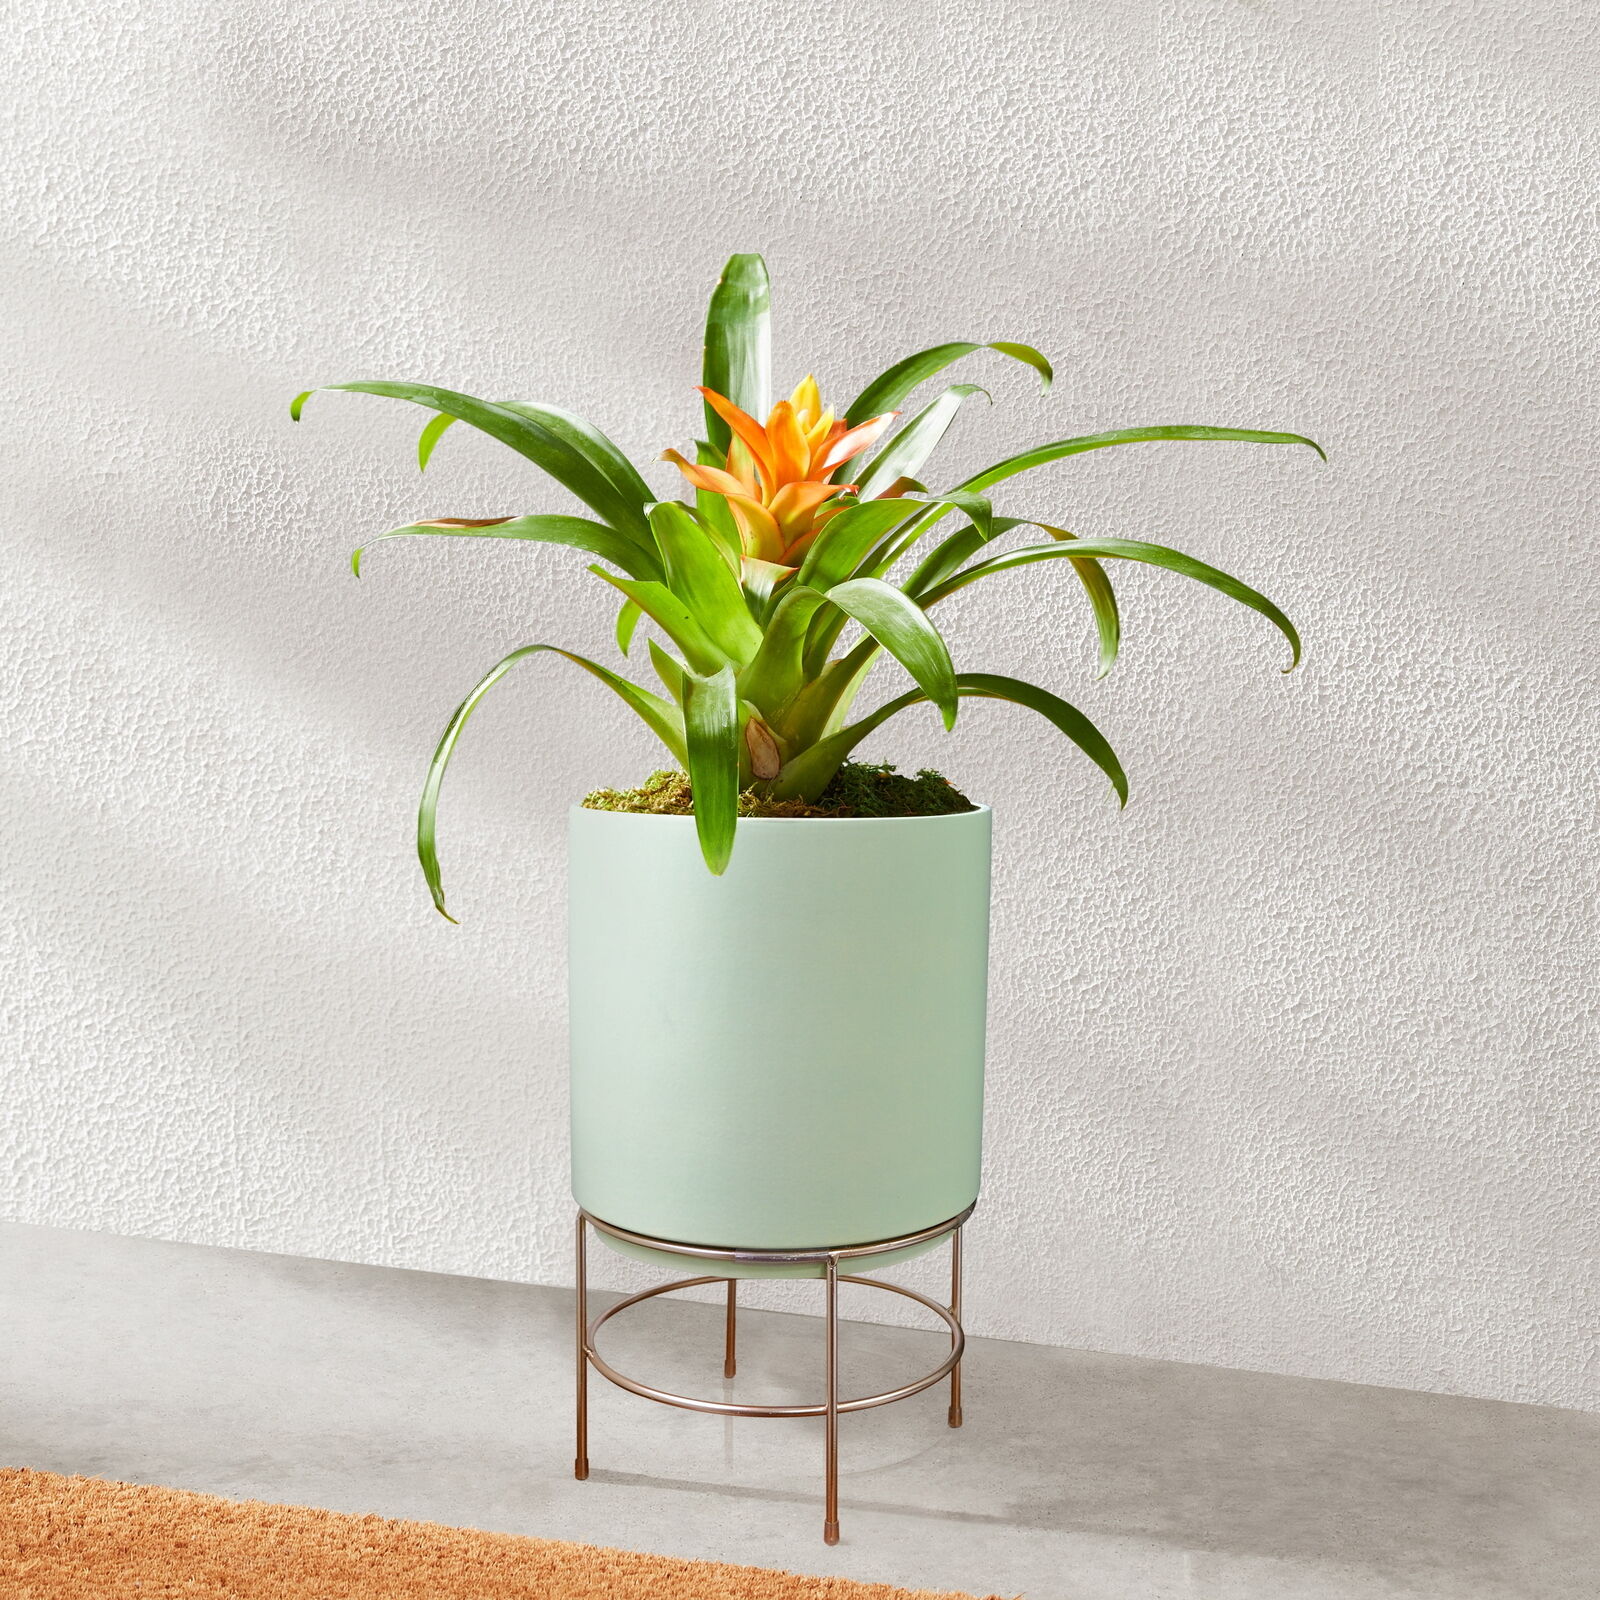 10 in Dia Green Ceramic Planter with Gold Stand